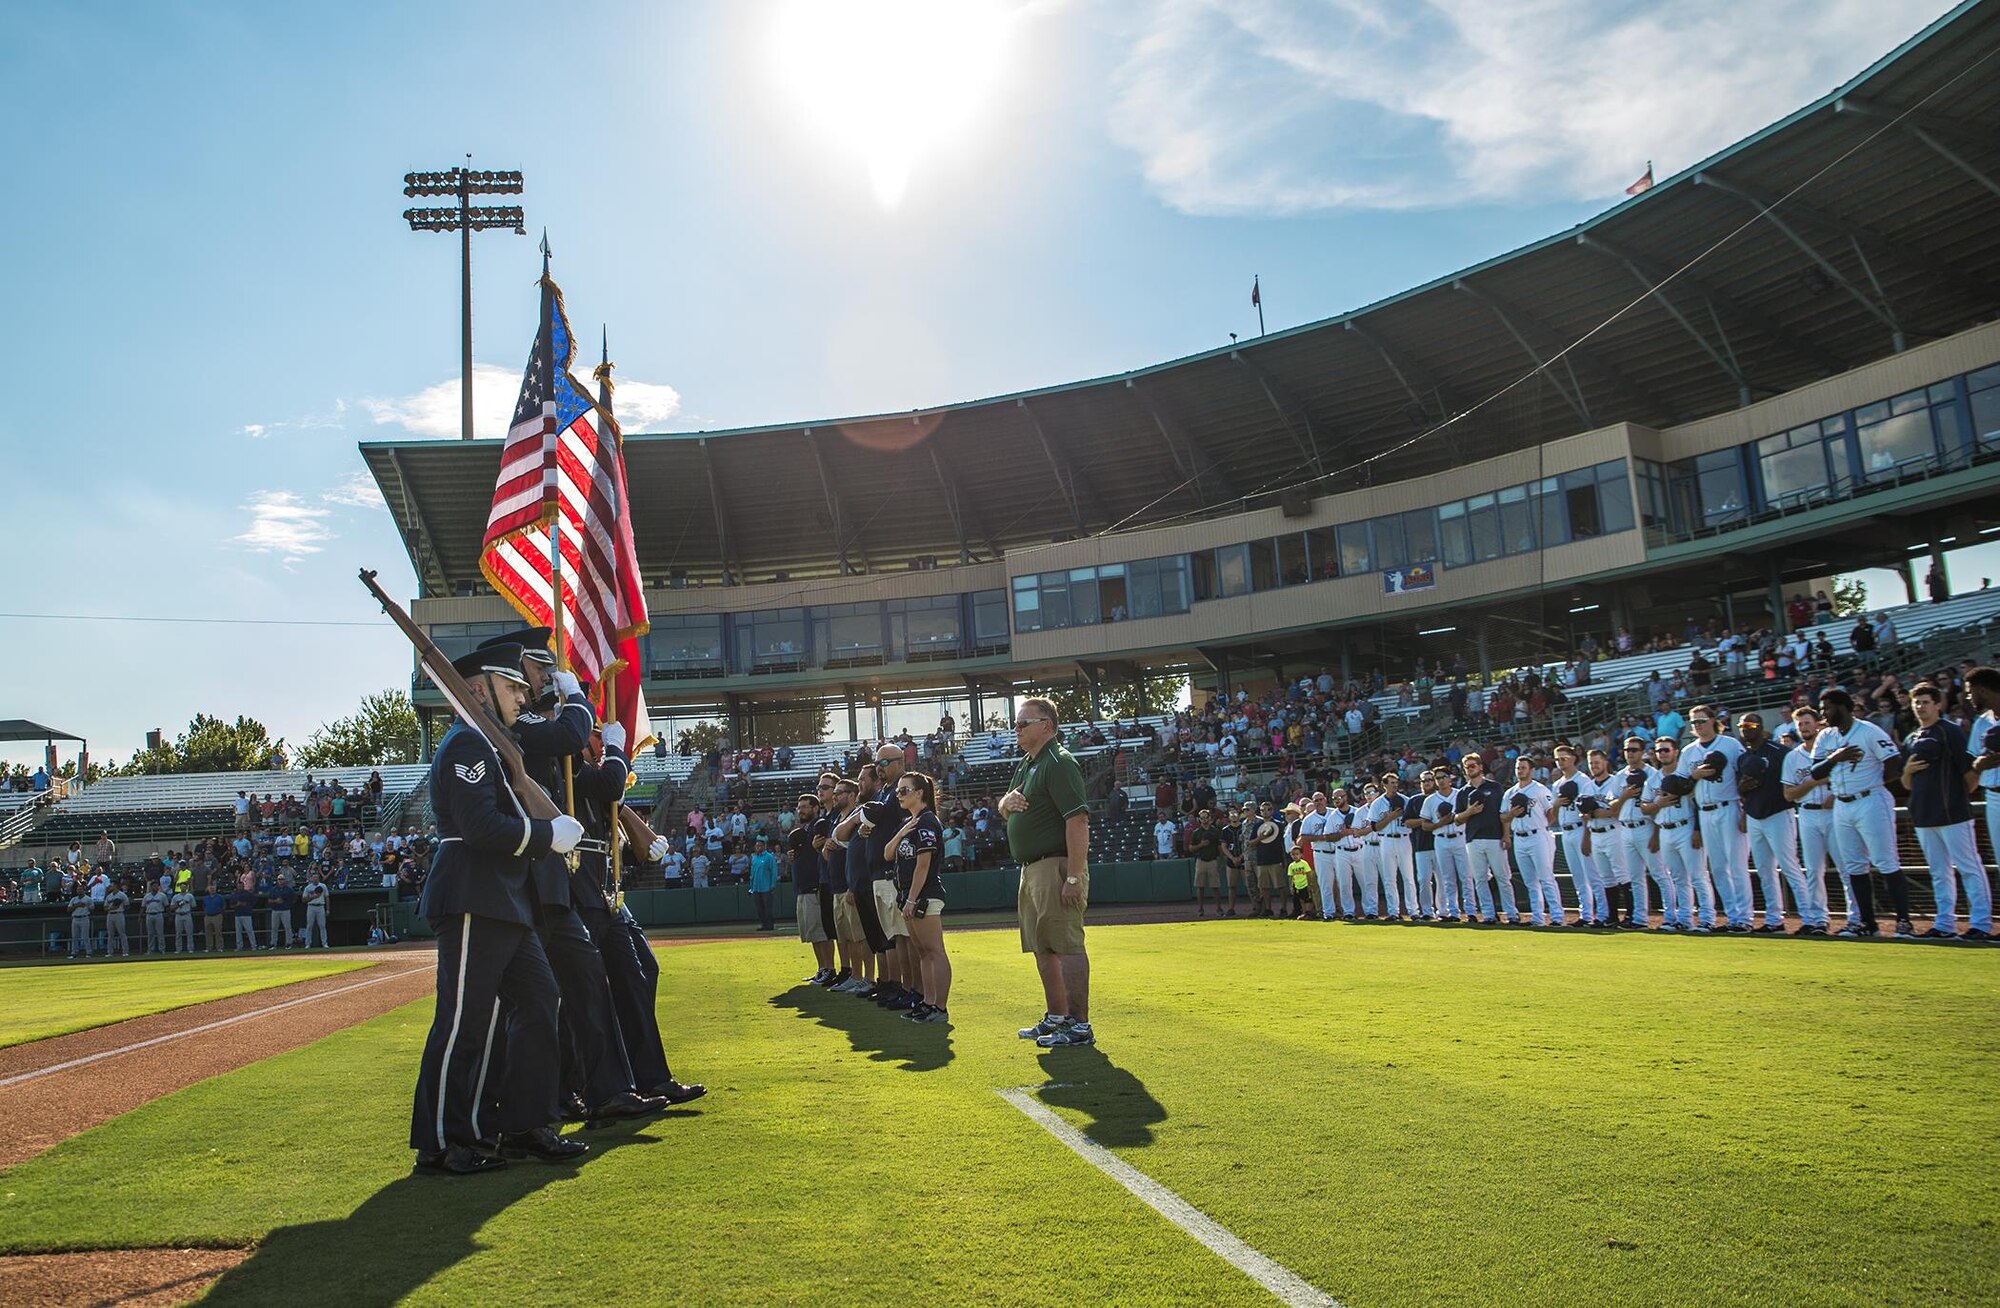 The 433rd Airlift Wing Color Guard presented the colors at the San Antonio Missions baseball game July 16, 2017 at Nelson Wolff Stadium. (U.S. Air Force photo by Benjamin Faske)